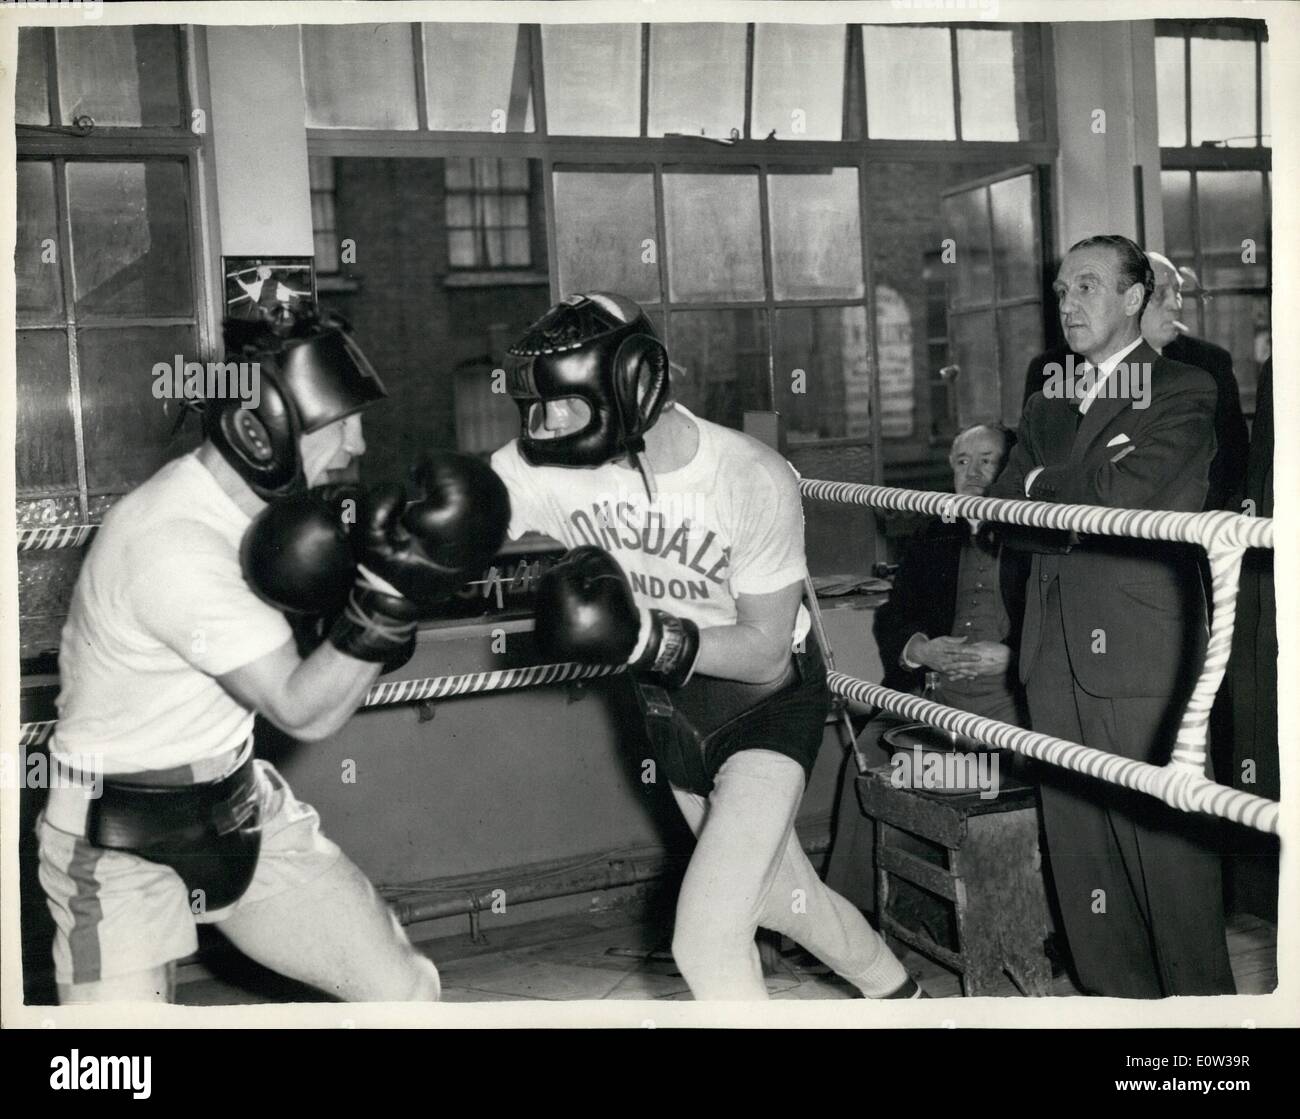 Mar. 03, 1961 - Minister of transport watches Terry Downes in training. Mr. Ernest Marples the minister of transport is a keen follower of boxing - and it was his intention of watching the contests at wembley next Tuesday - which includes the match between Terry Downes middle weight champion - and America's Willie Green - but owing to house of Commons commitments - he will not be able to do so. He went along the bloom's gymnasium - this afternoon to watch Downes in training Stock Photo